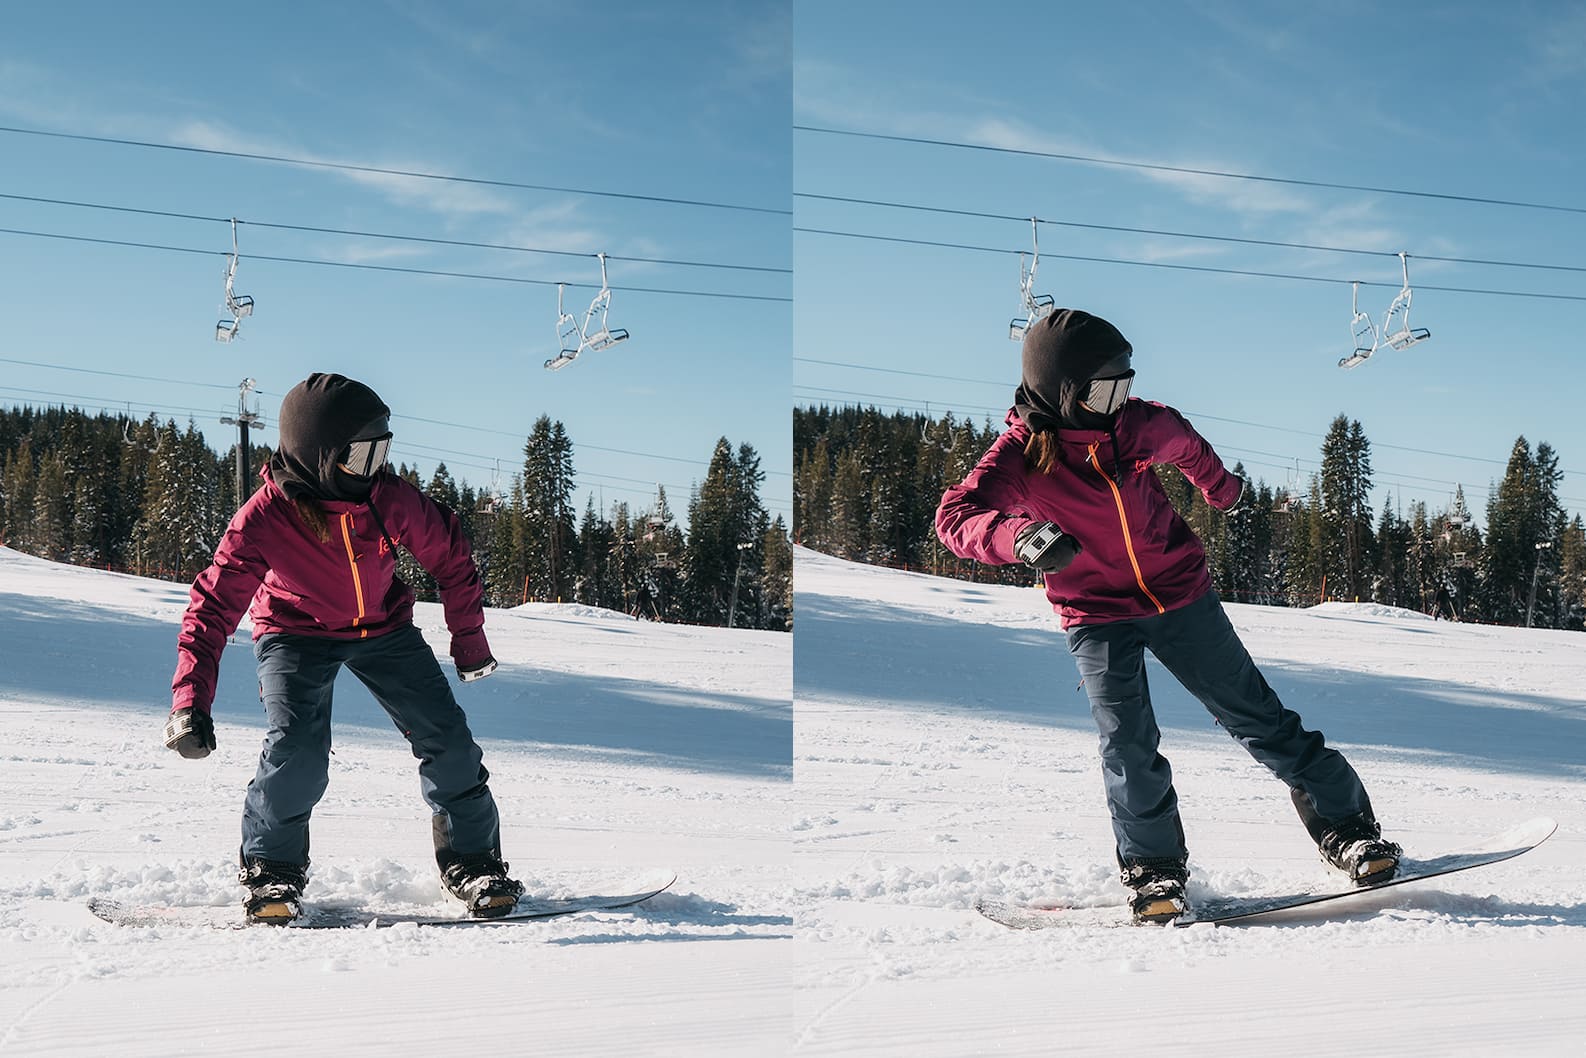 6 Snowboard Tricks to Learn Right Now | Burton Snowboards